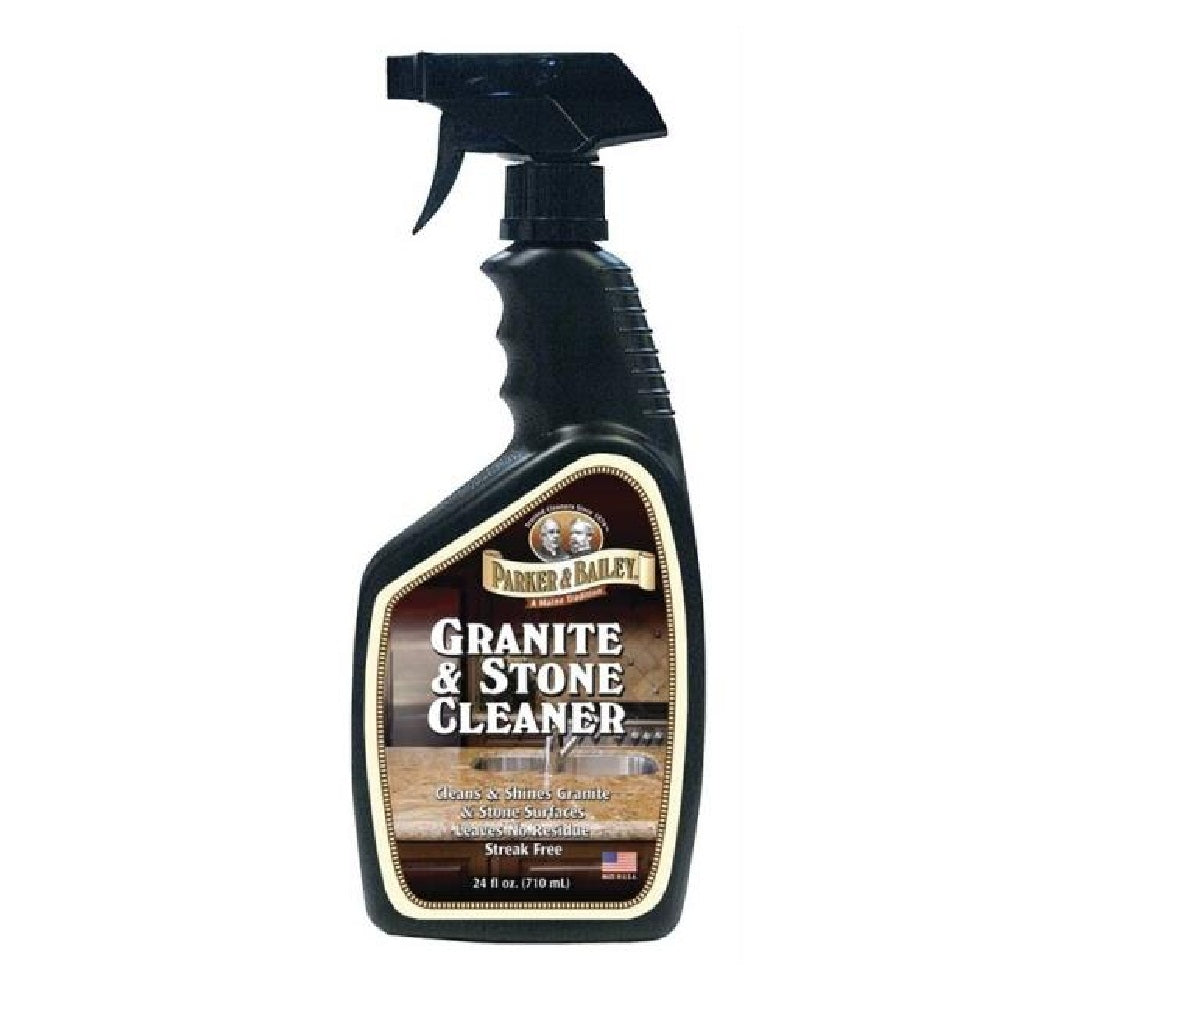 Buy parker and bailey granite cleaner - Online store for chemicals & cleaners, specialty cleaners in USA, on sale, low price, discount deals, coupon code